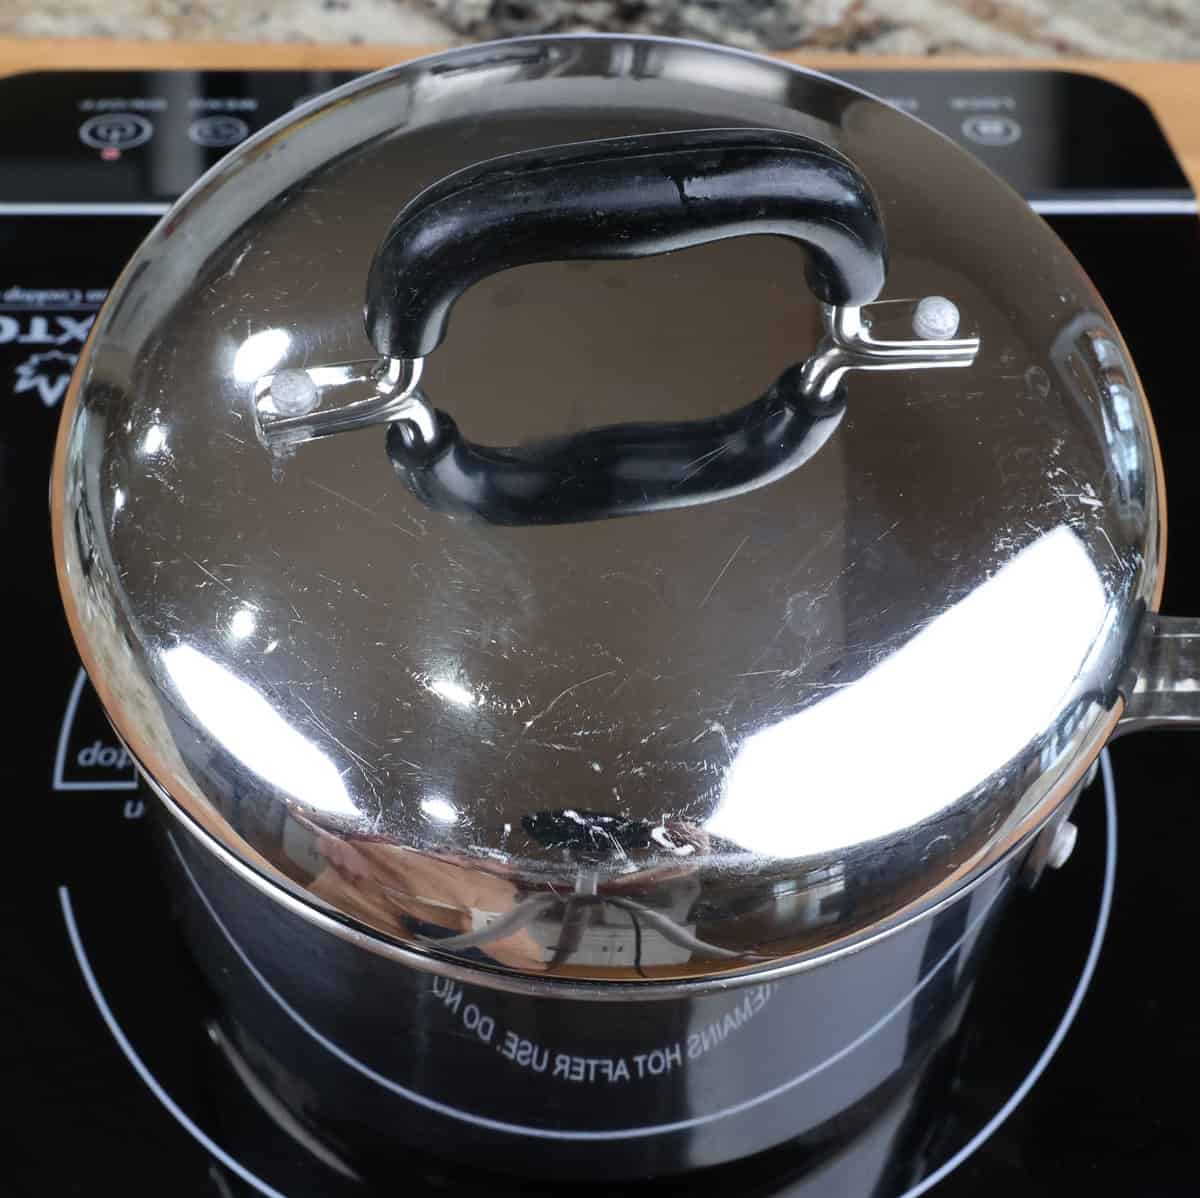 a covered pot on a stove.